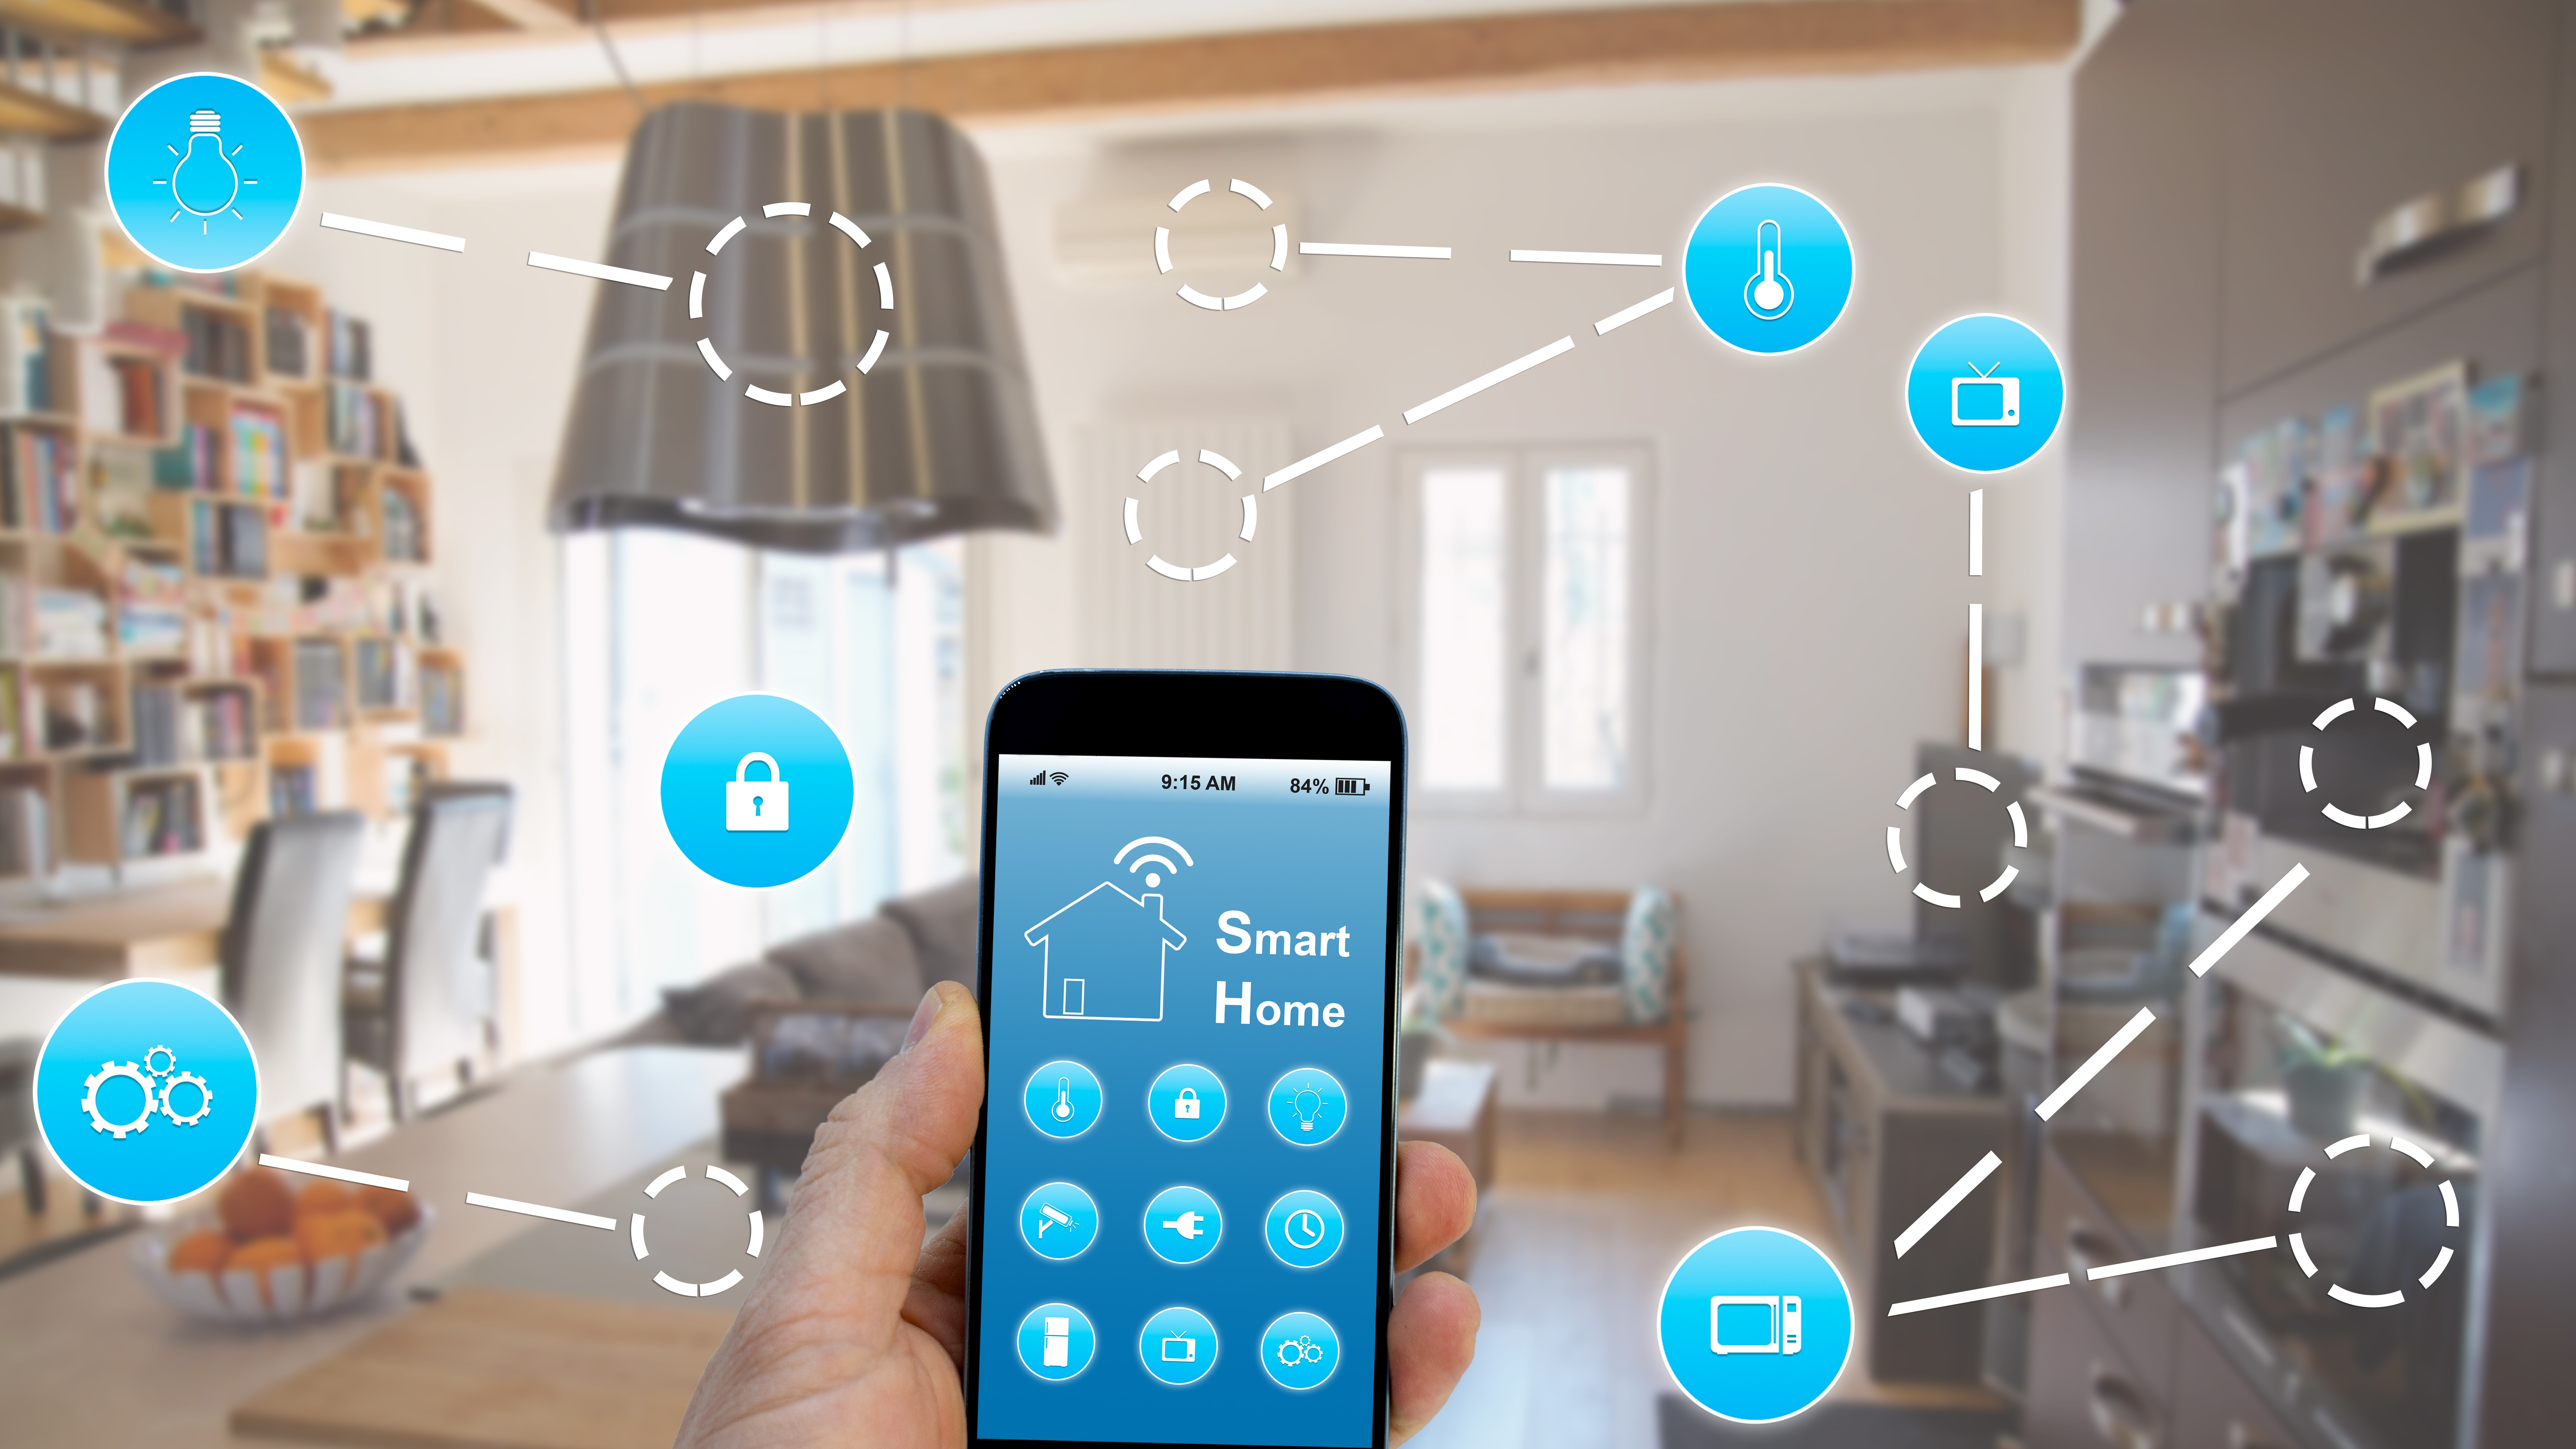 Smart home devices are being hit with more cyberattacks than ever